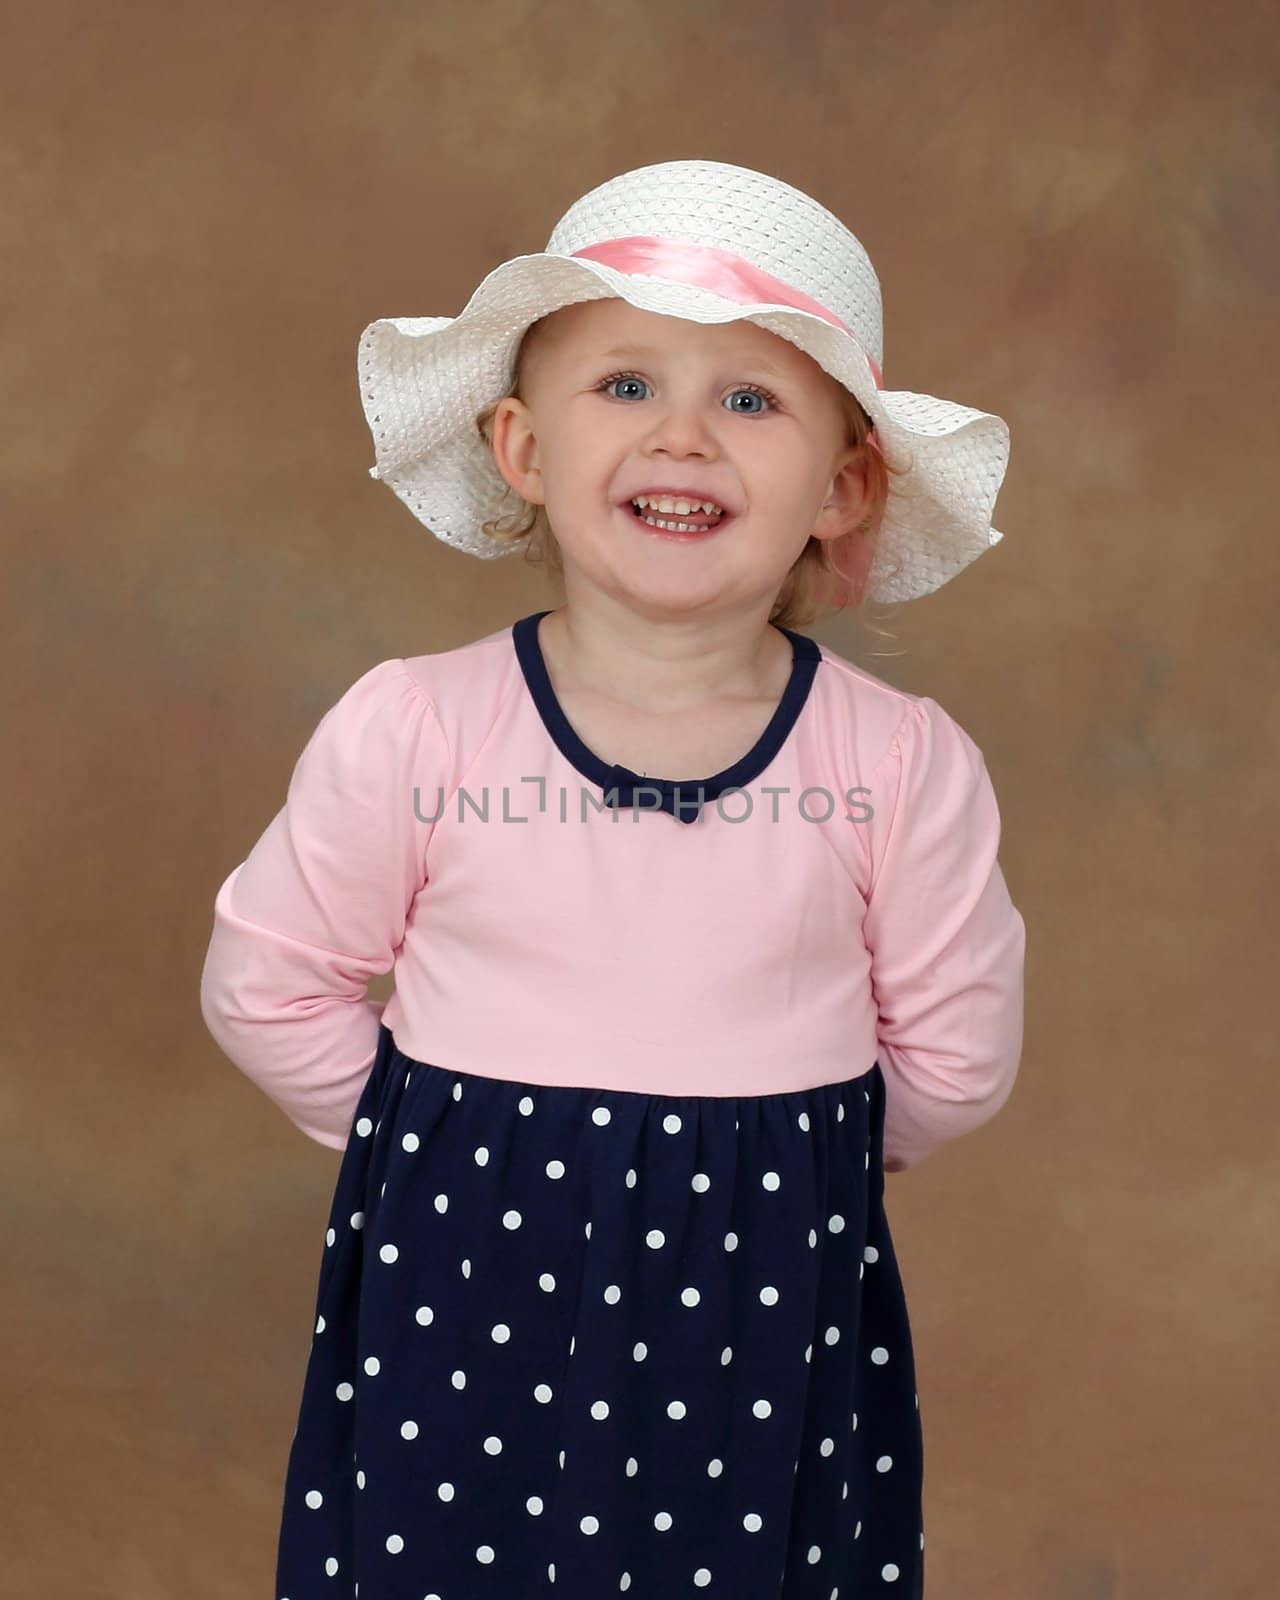 A little blond girl with blue eyes and summer hat smiles happily at the camera